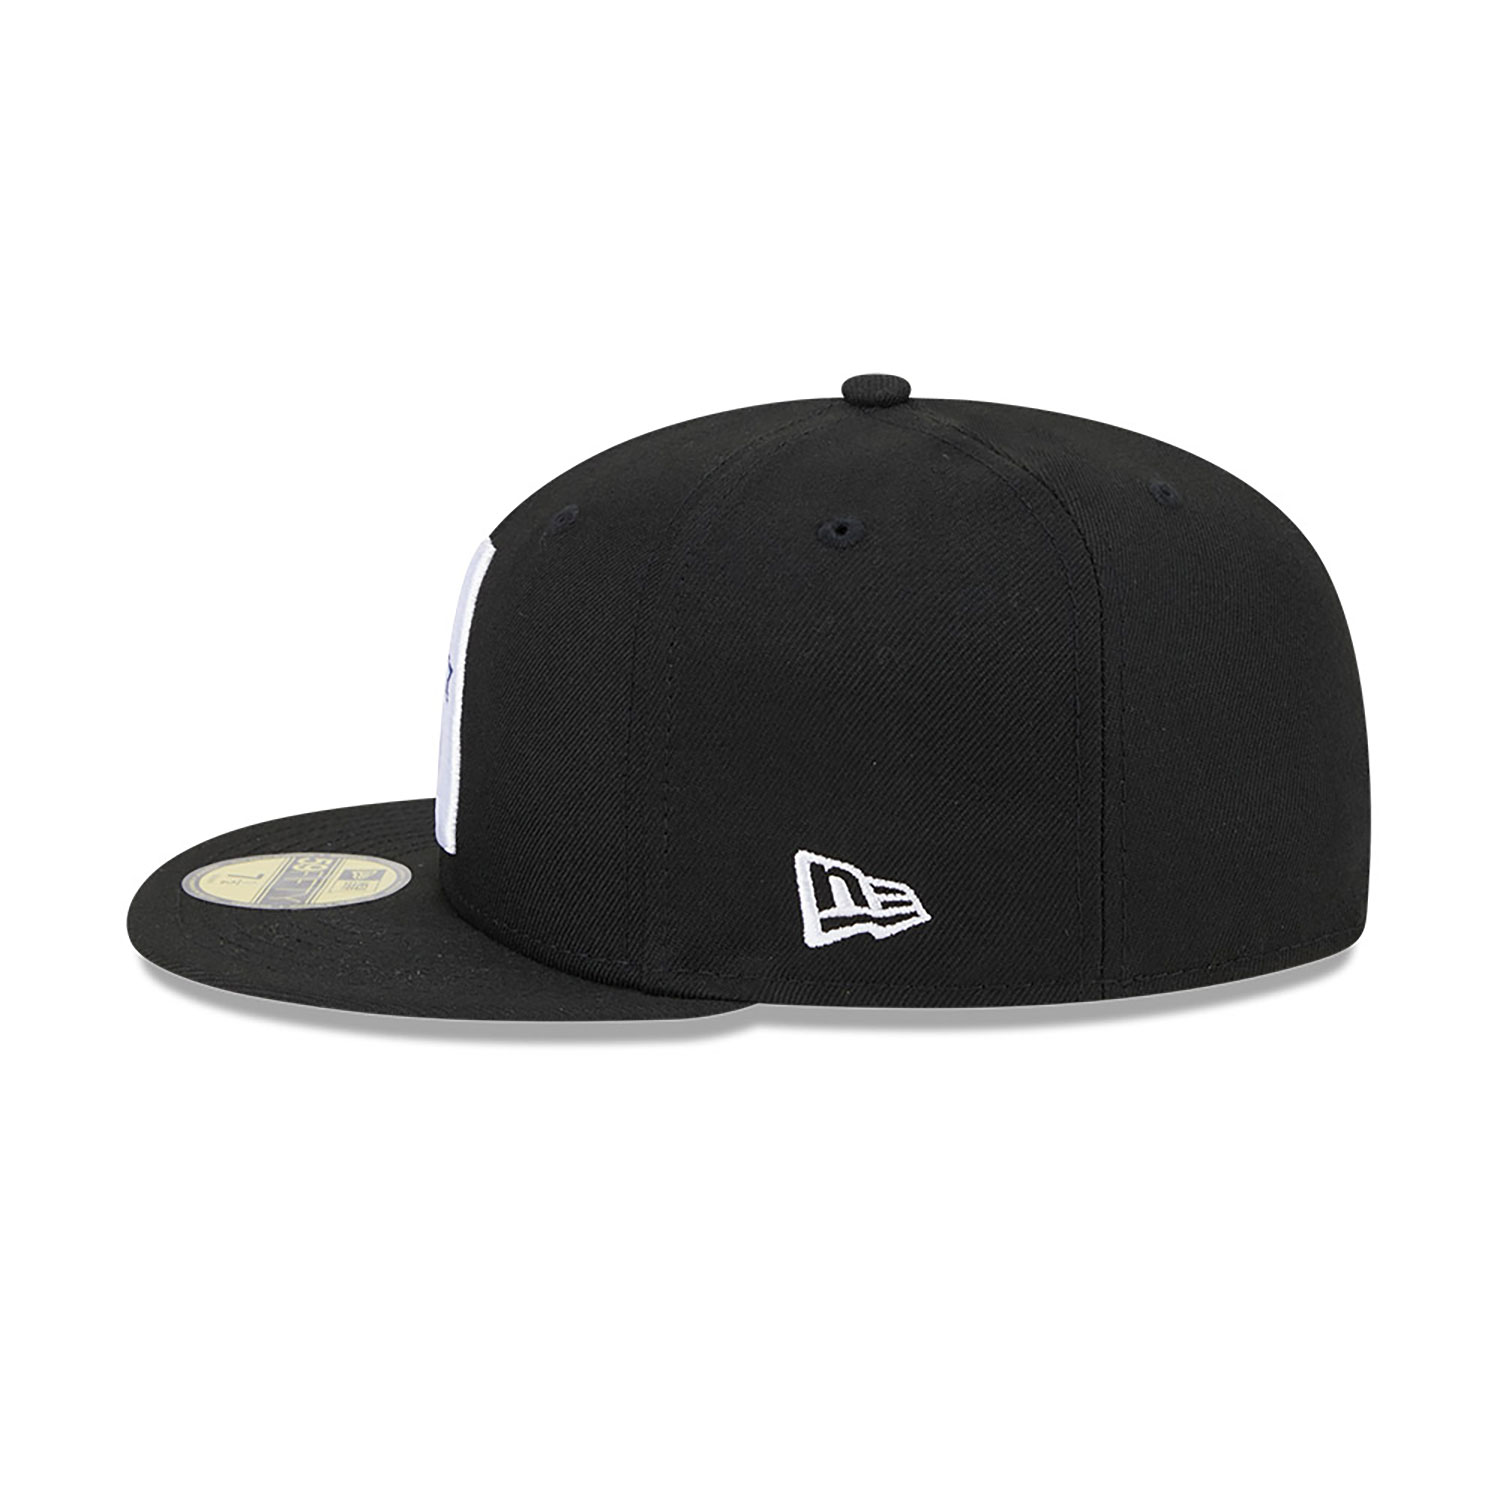 Houston Astros Raceway Black 59FIFTY Fitted Cap